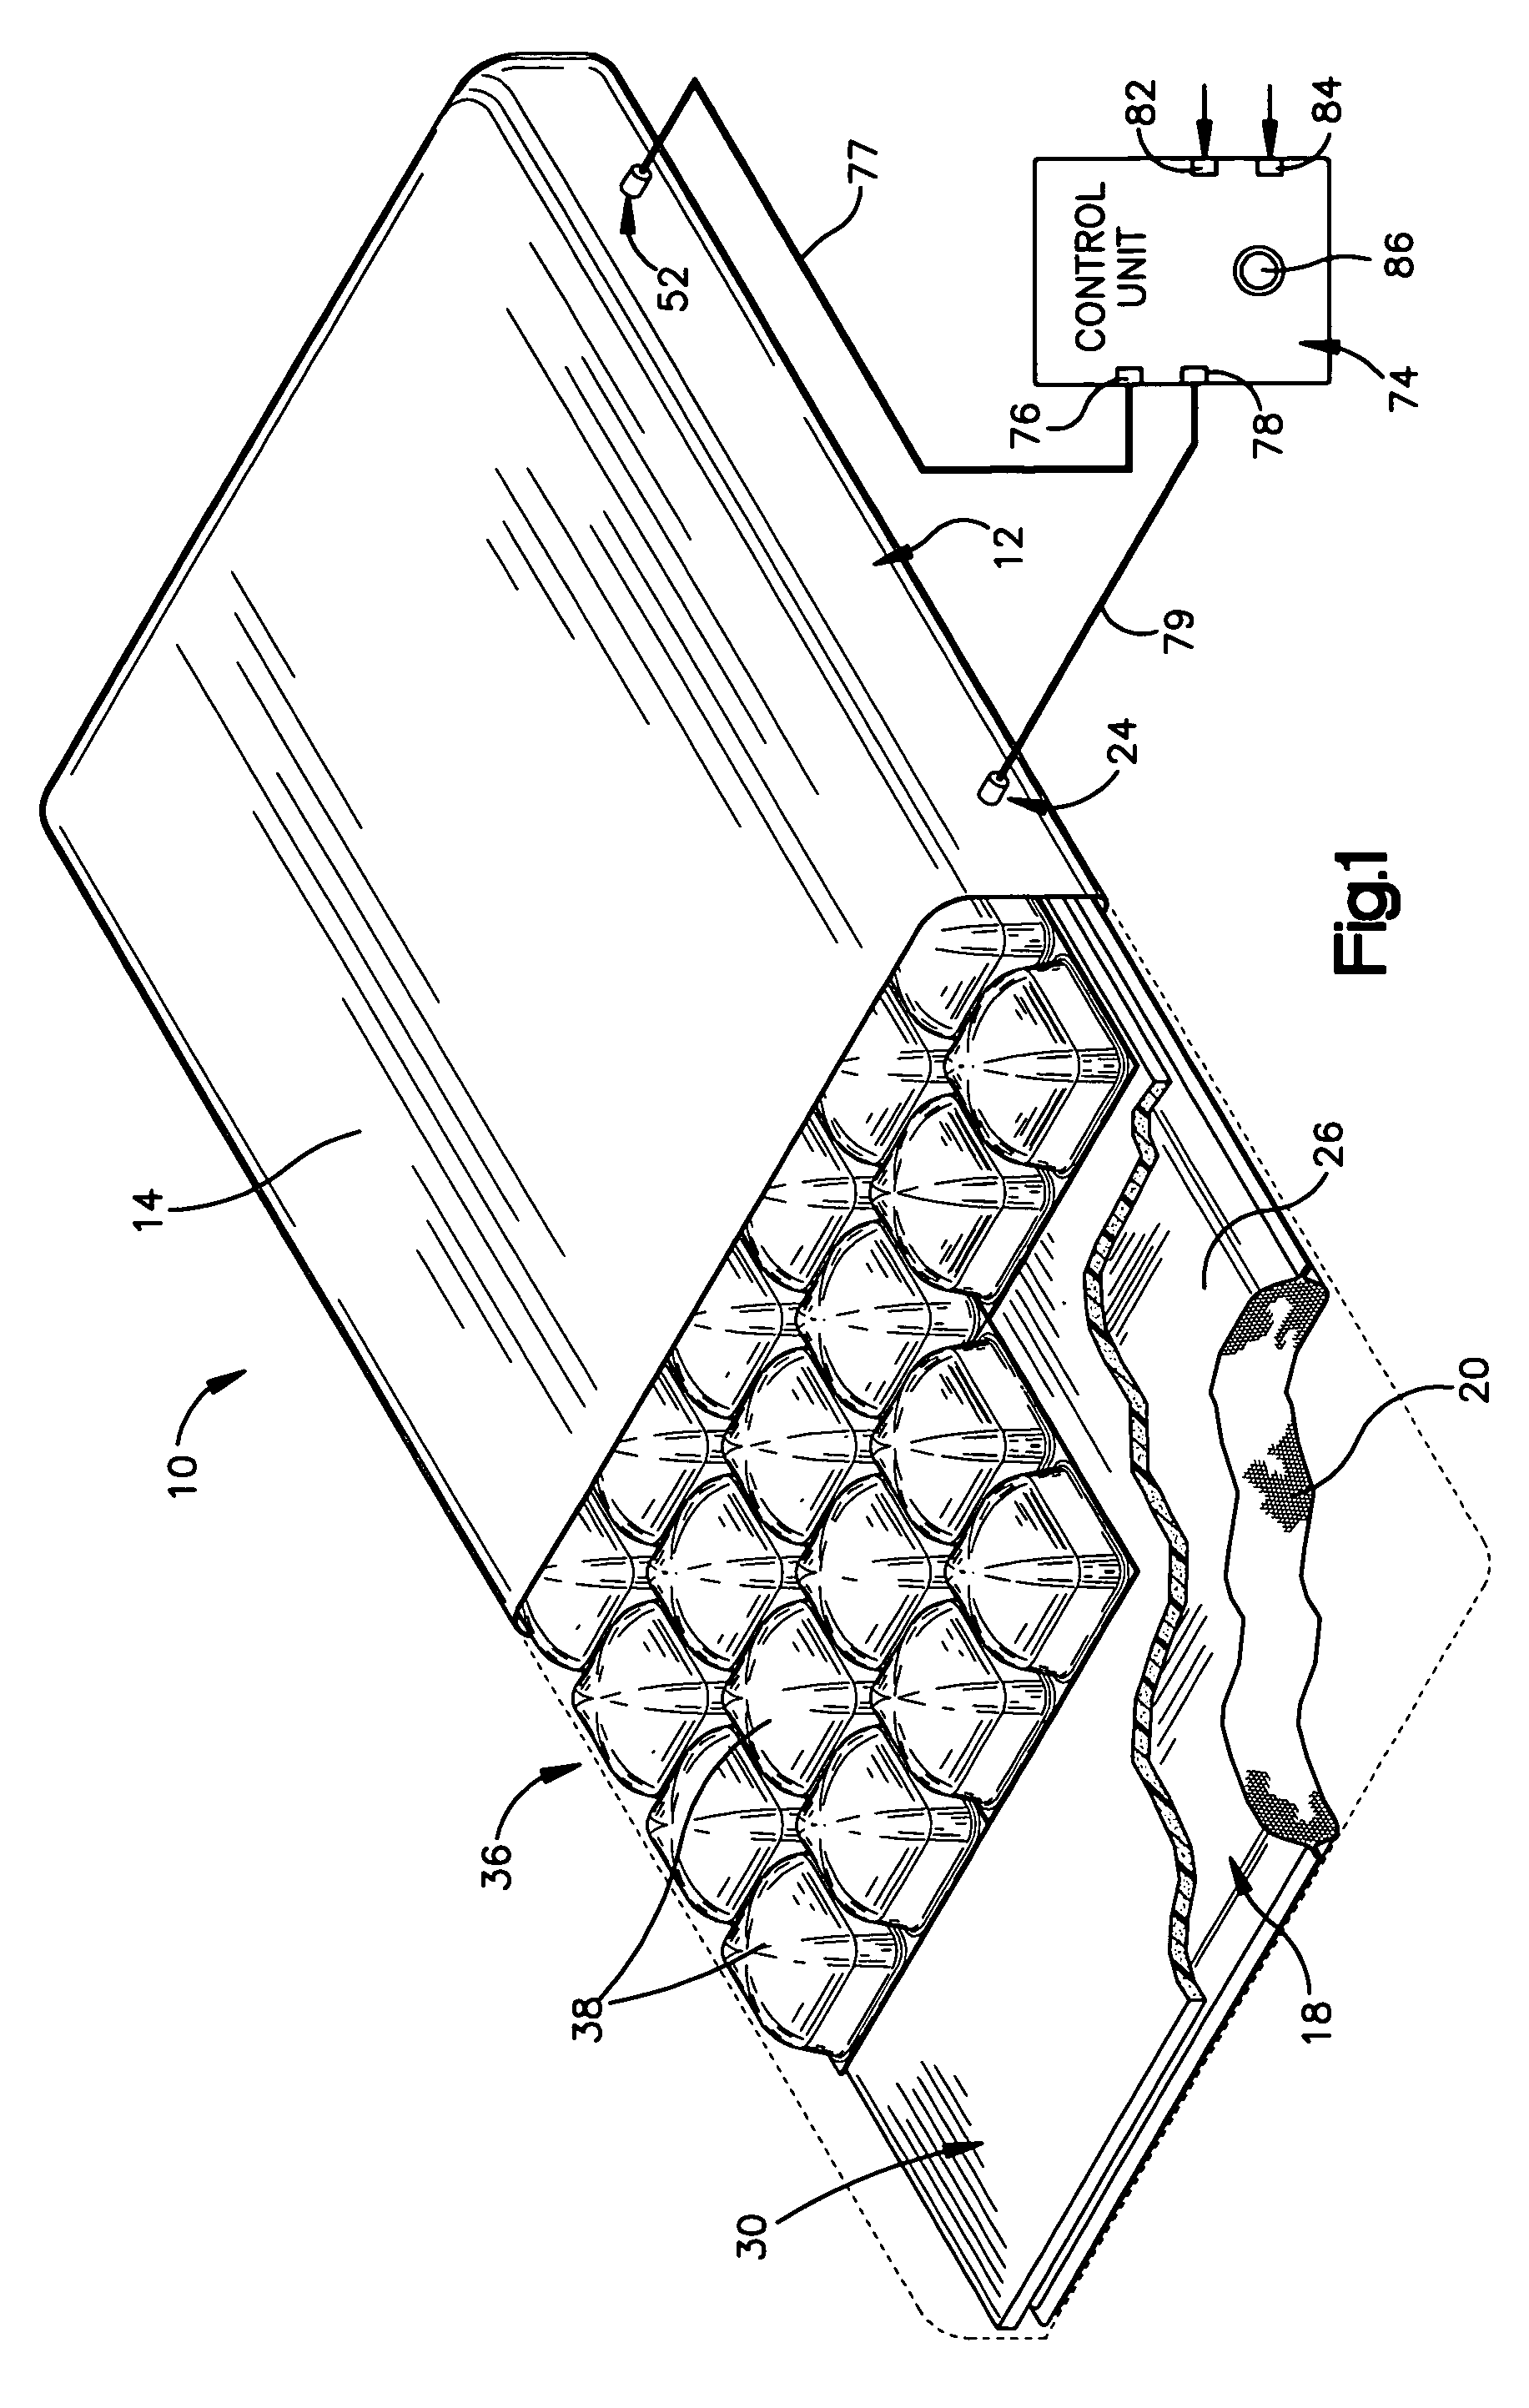 Patient support apparatus having an air cell grid and associated method